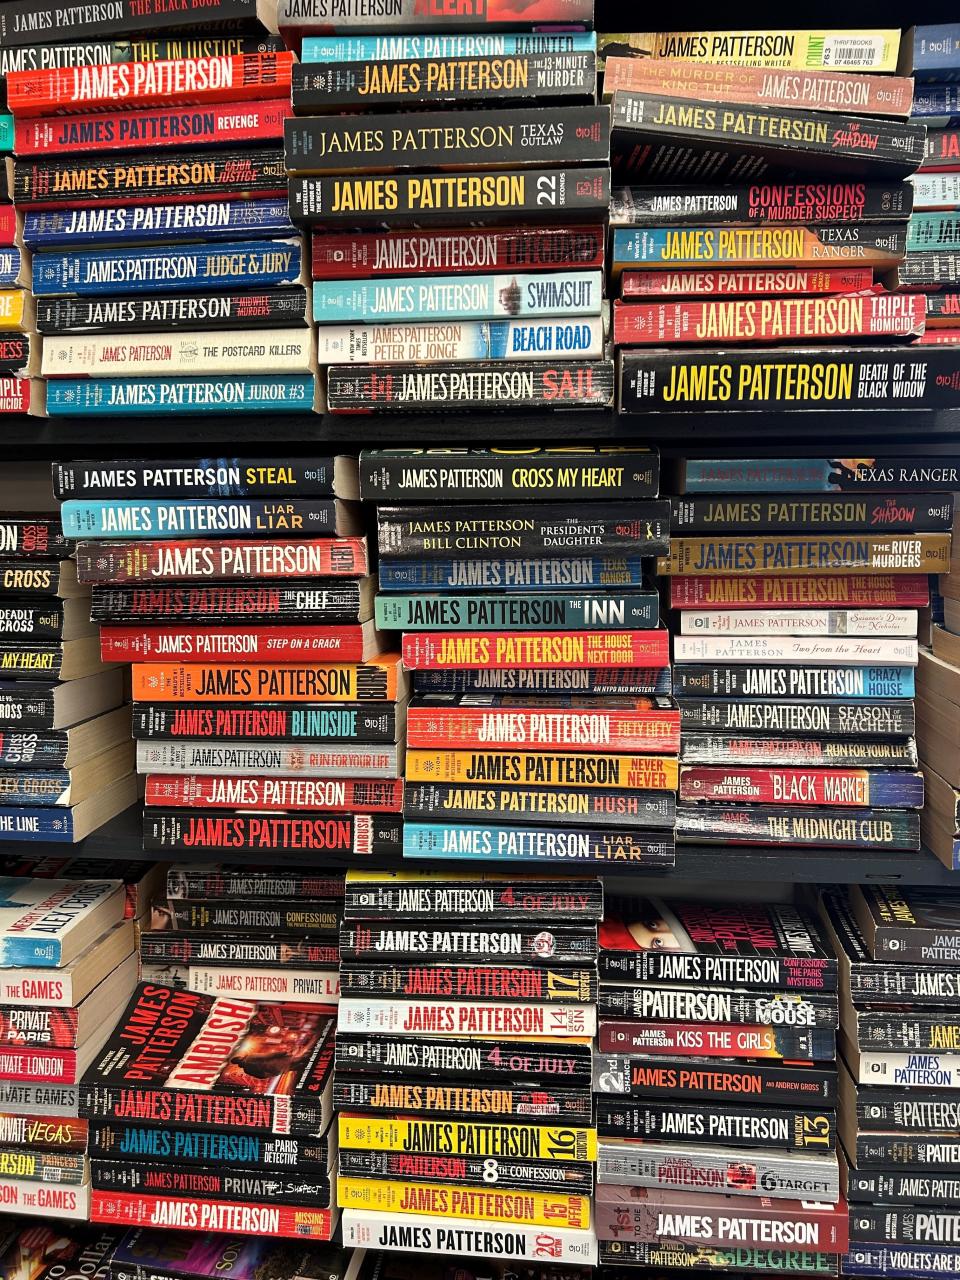 Love James Patterson? You're in luck at the new Flutterbuy Books and More in Cape Coral.